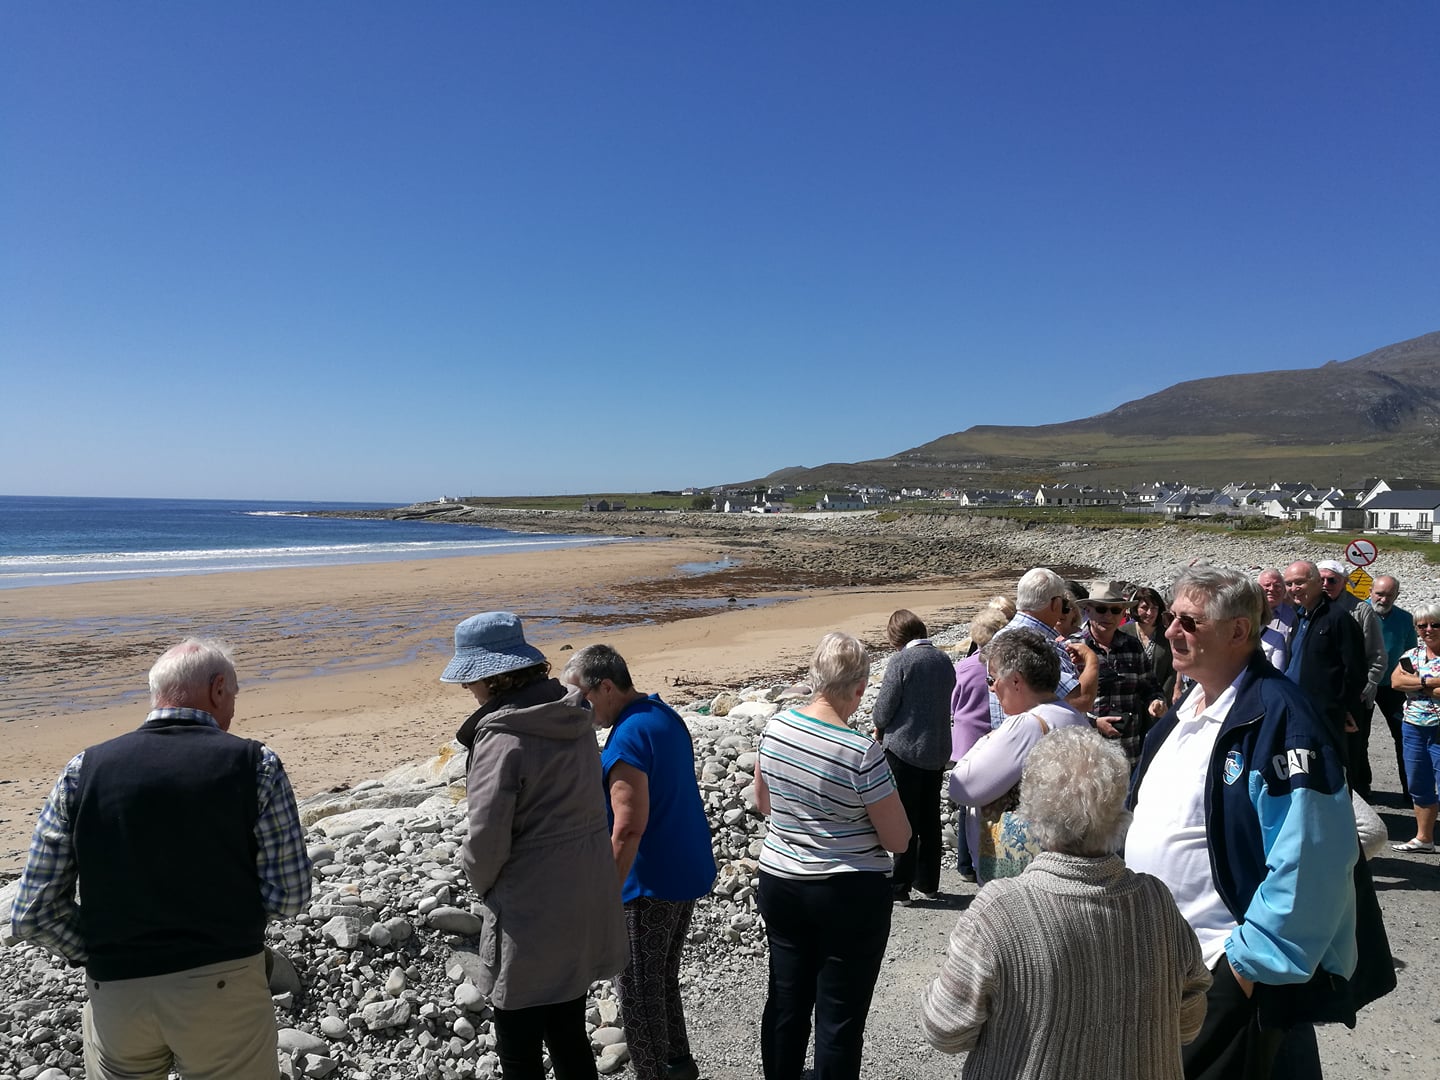 According to the Achill Tourism FB page, tourists from England flocked to the new Dooagh beach after seeing it on news reports. Image: Facebook/@AchillIslandTouristOffice